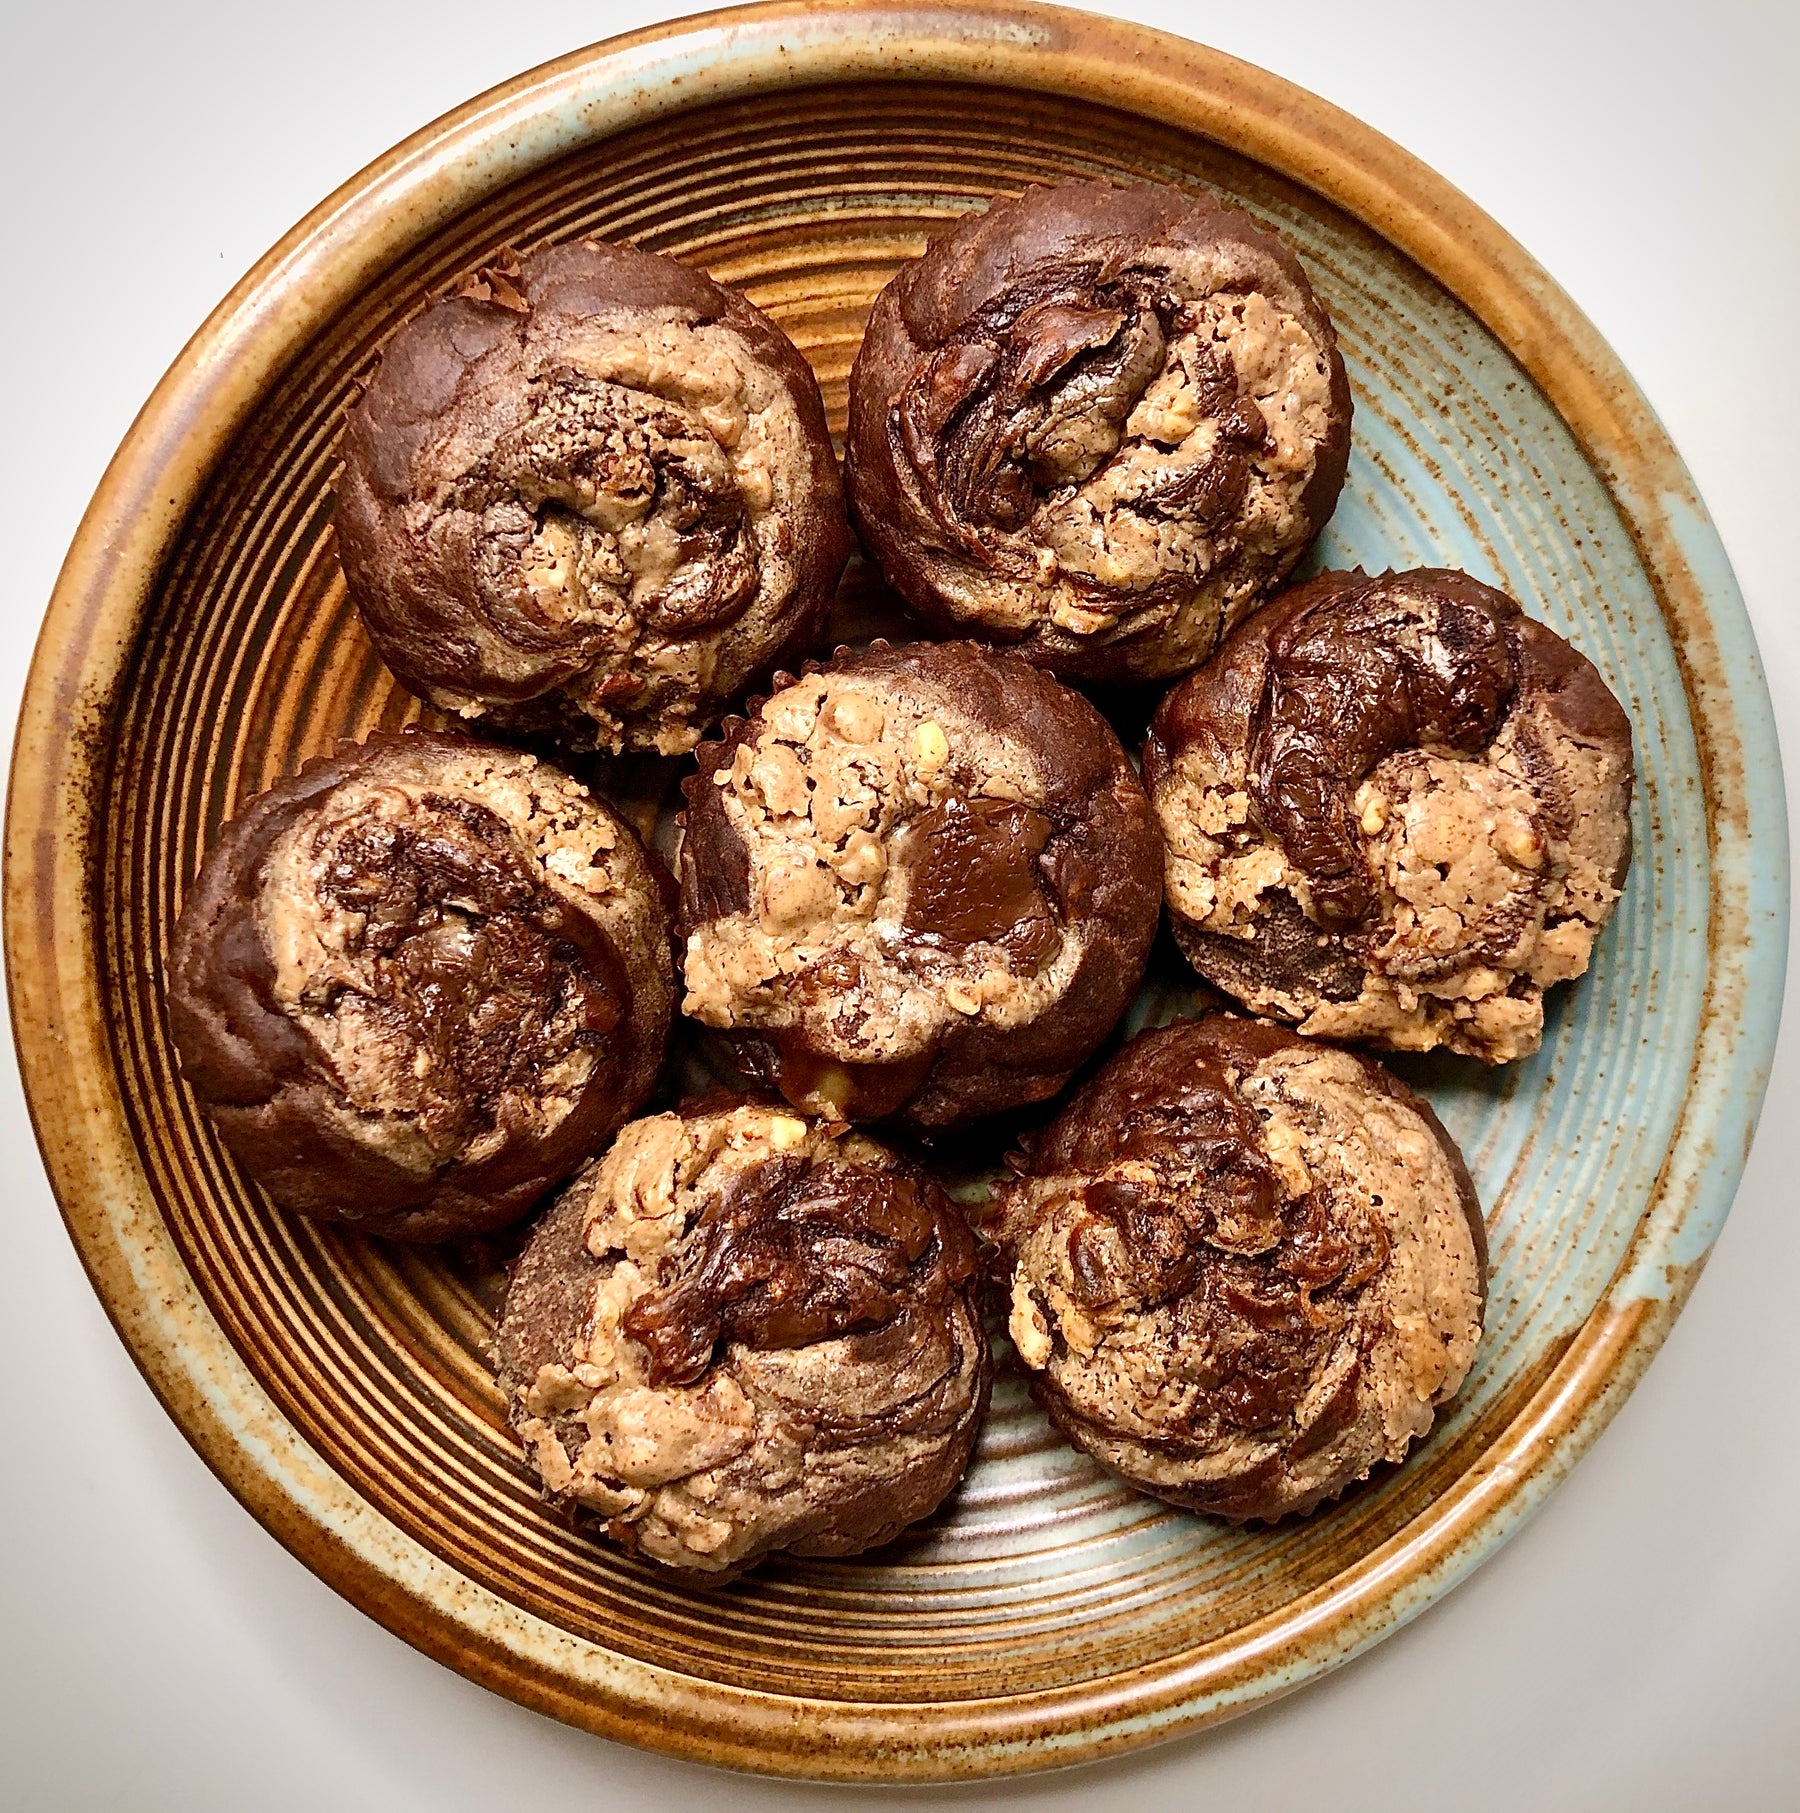 Chocolate Banana Muffins with Almond Butter and Tiger Nut Swirls by @SincerelyAline - KIRR